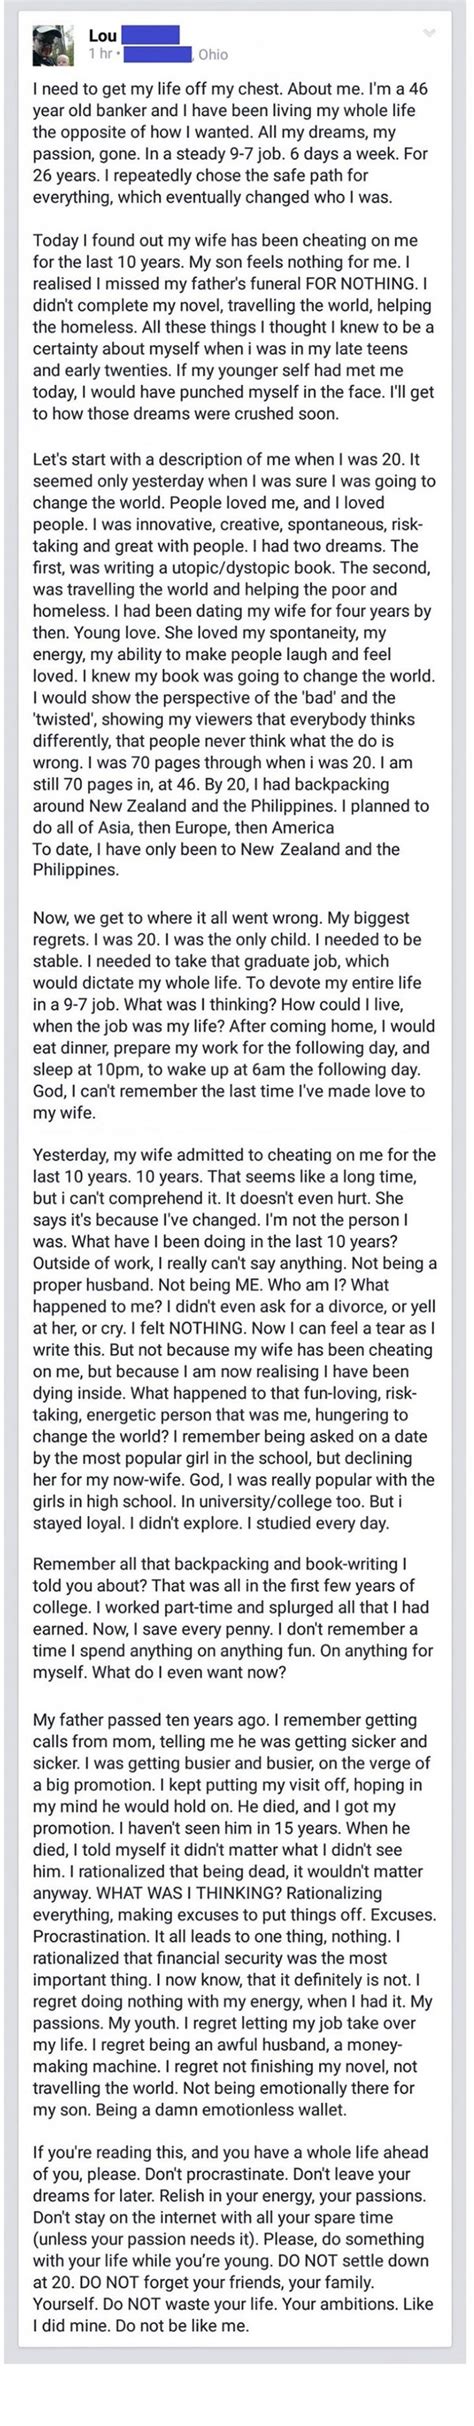 Man Writes A Heartbreaking Facebook Post When He Finds Out His Wife Has